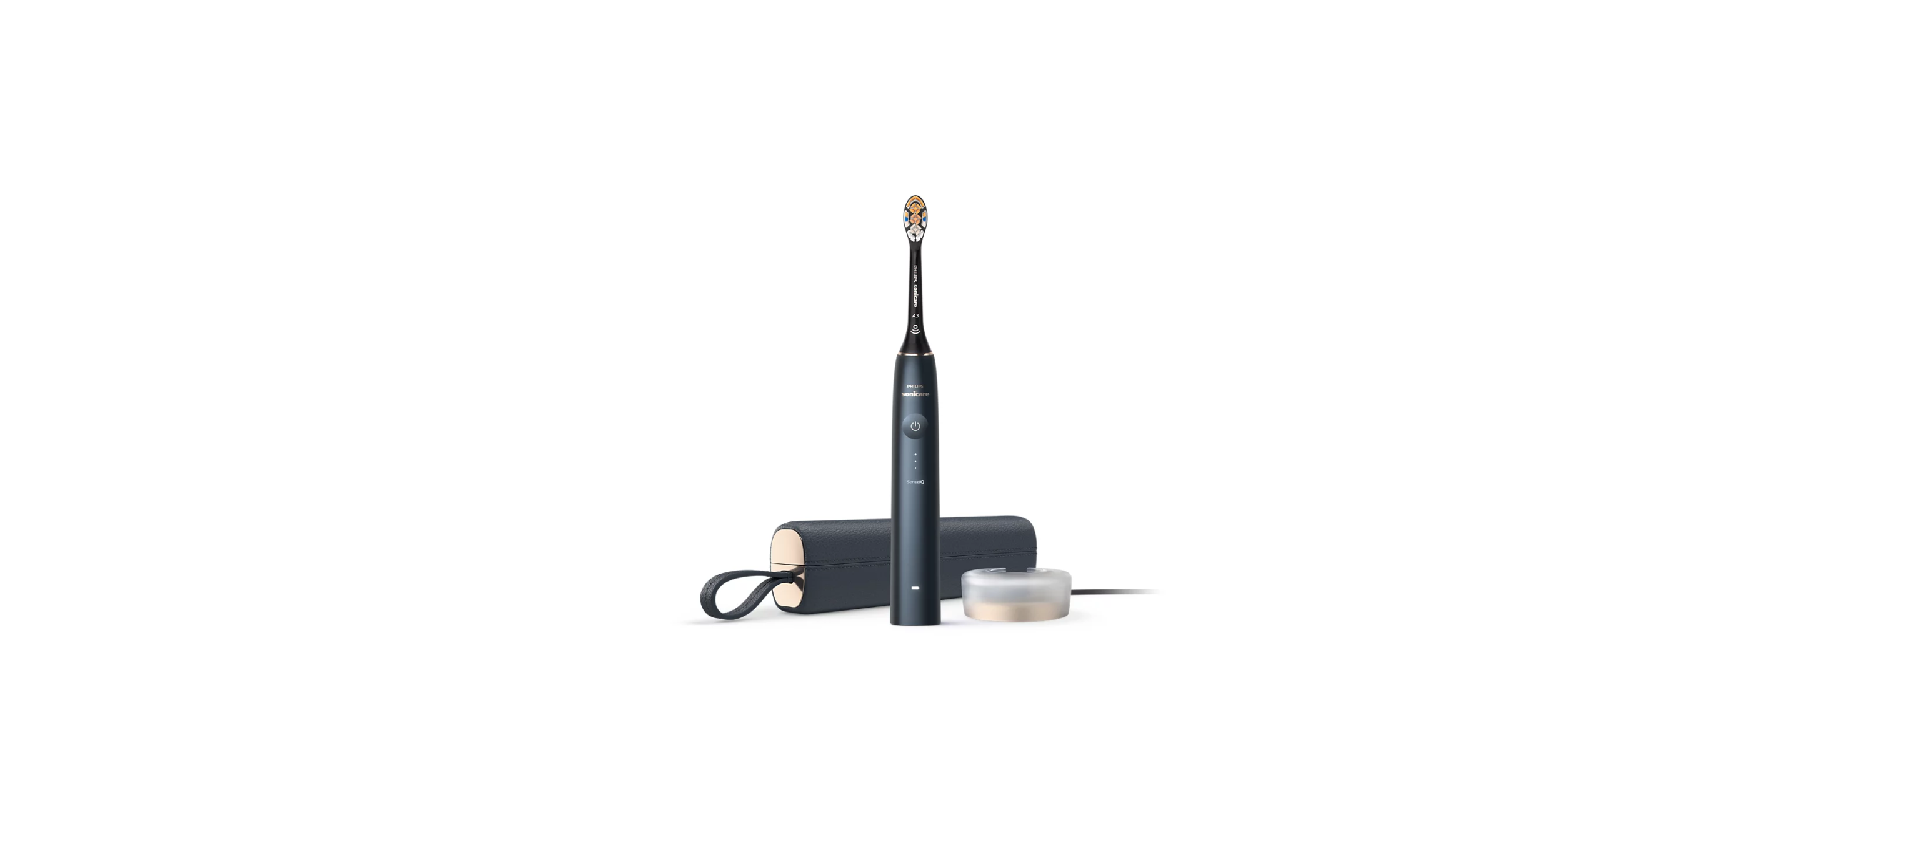 Philips-9900-Prestige-Power-Toothbrush-FEATURE